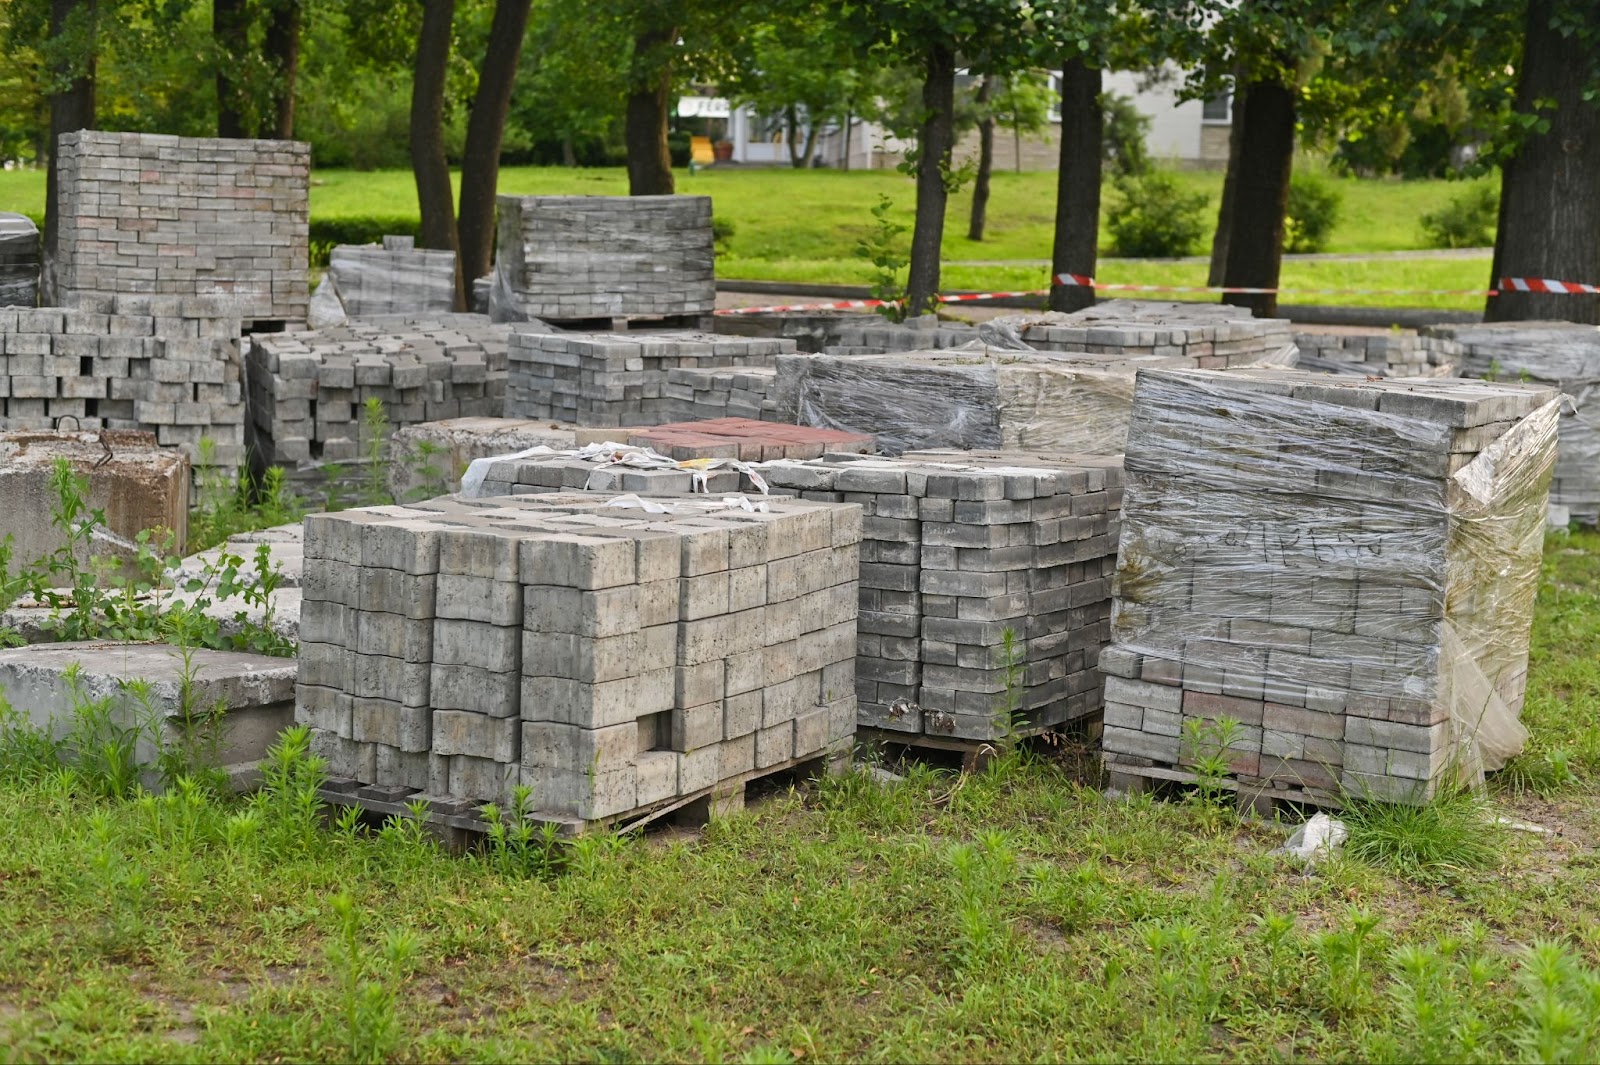 Piles of white bricks stacked in an outdoor warehouse, with trees and plants in the background.